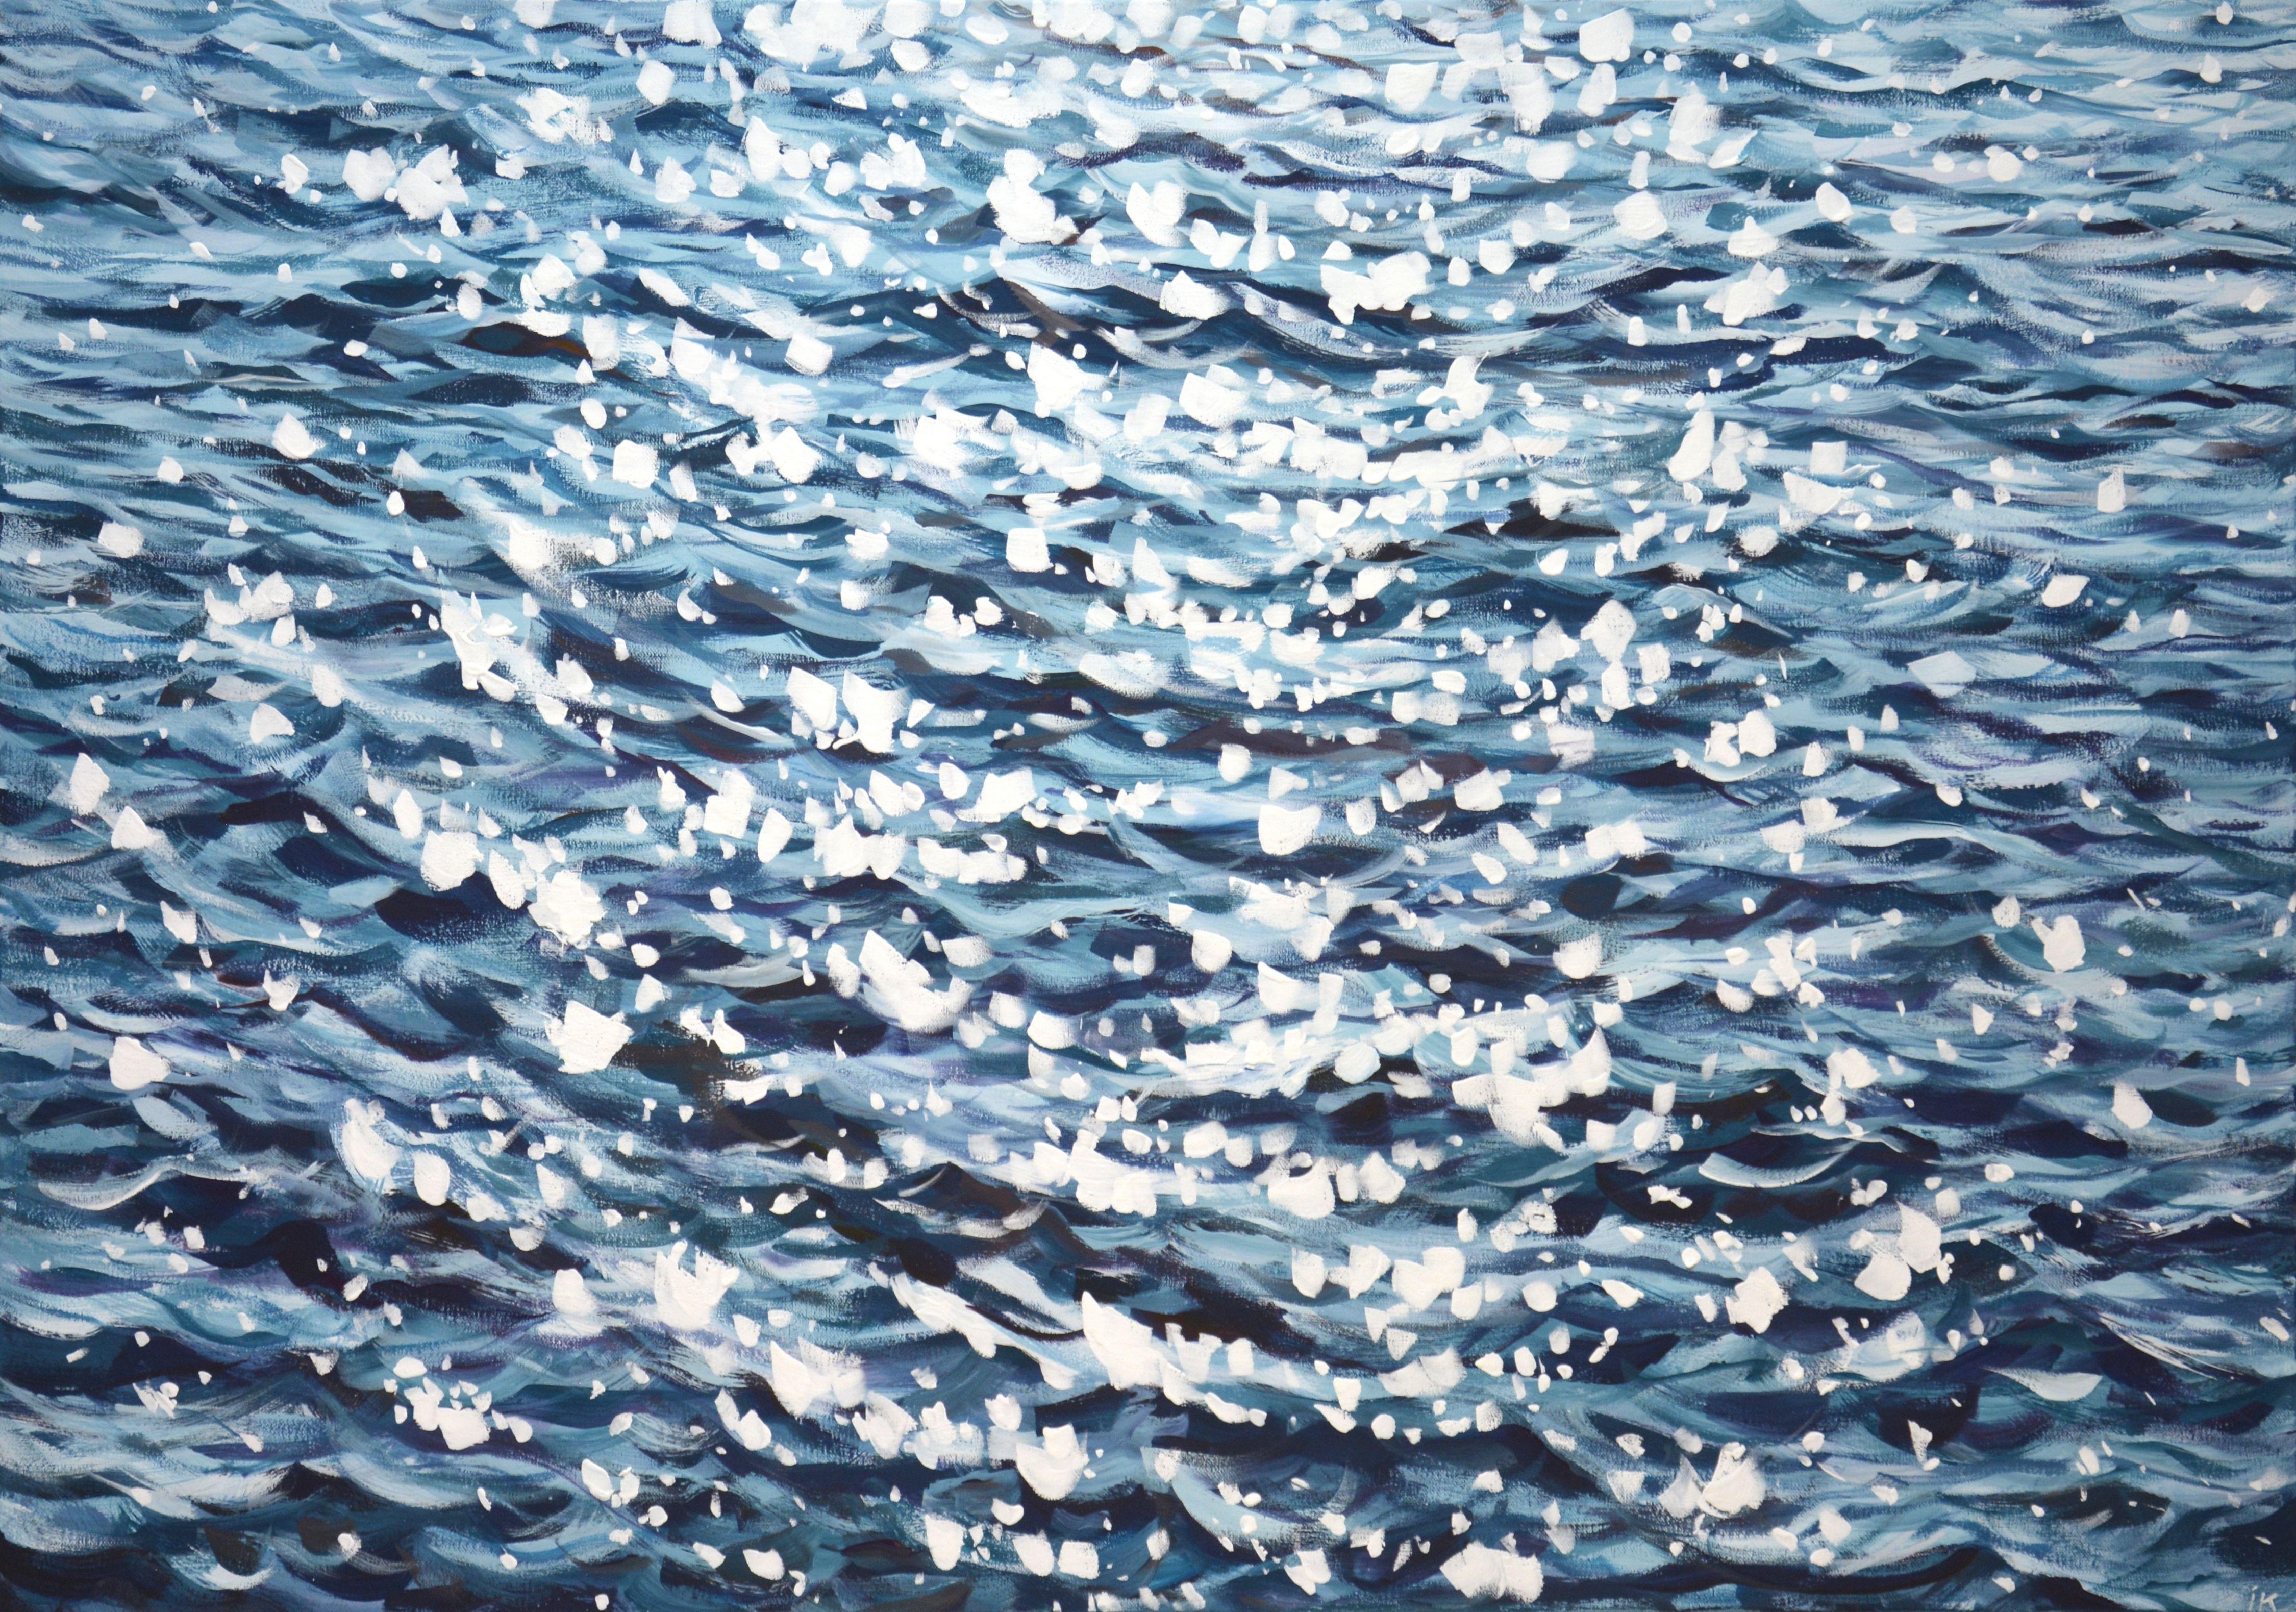 The magic of the ocean. Blue water, shine of the ocean, glare on the water create an atmosphere of relaxation, romance. Made in the style of realism. Part of a permanent series of seascapes. The picture is of good quality, the colors make children